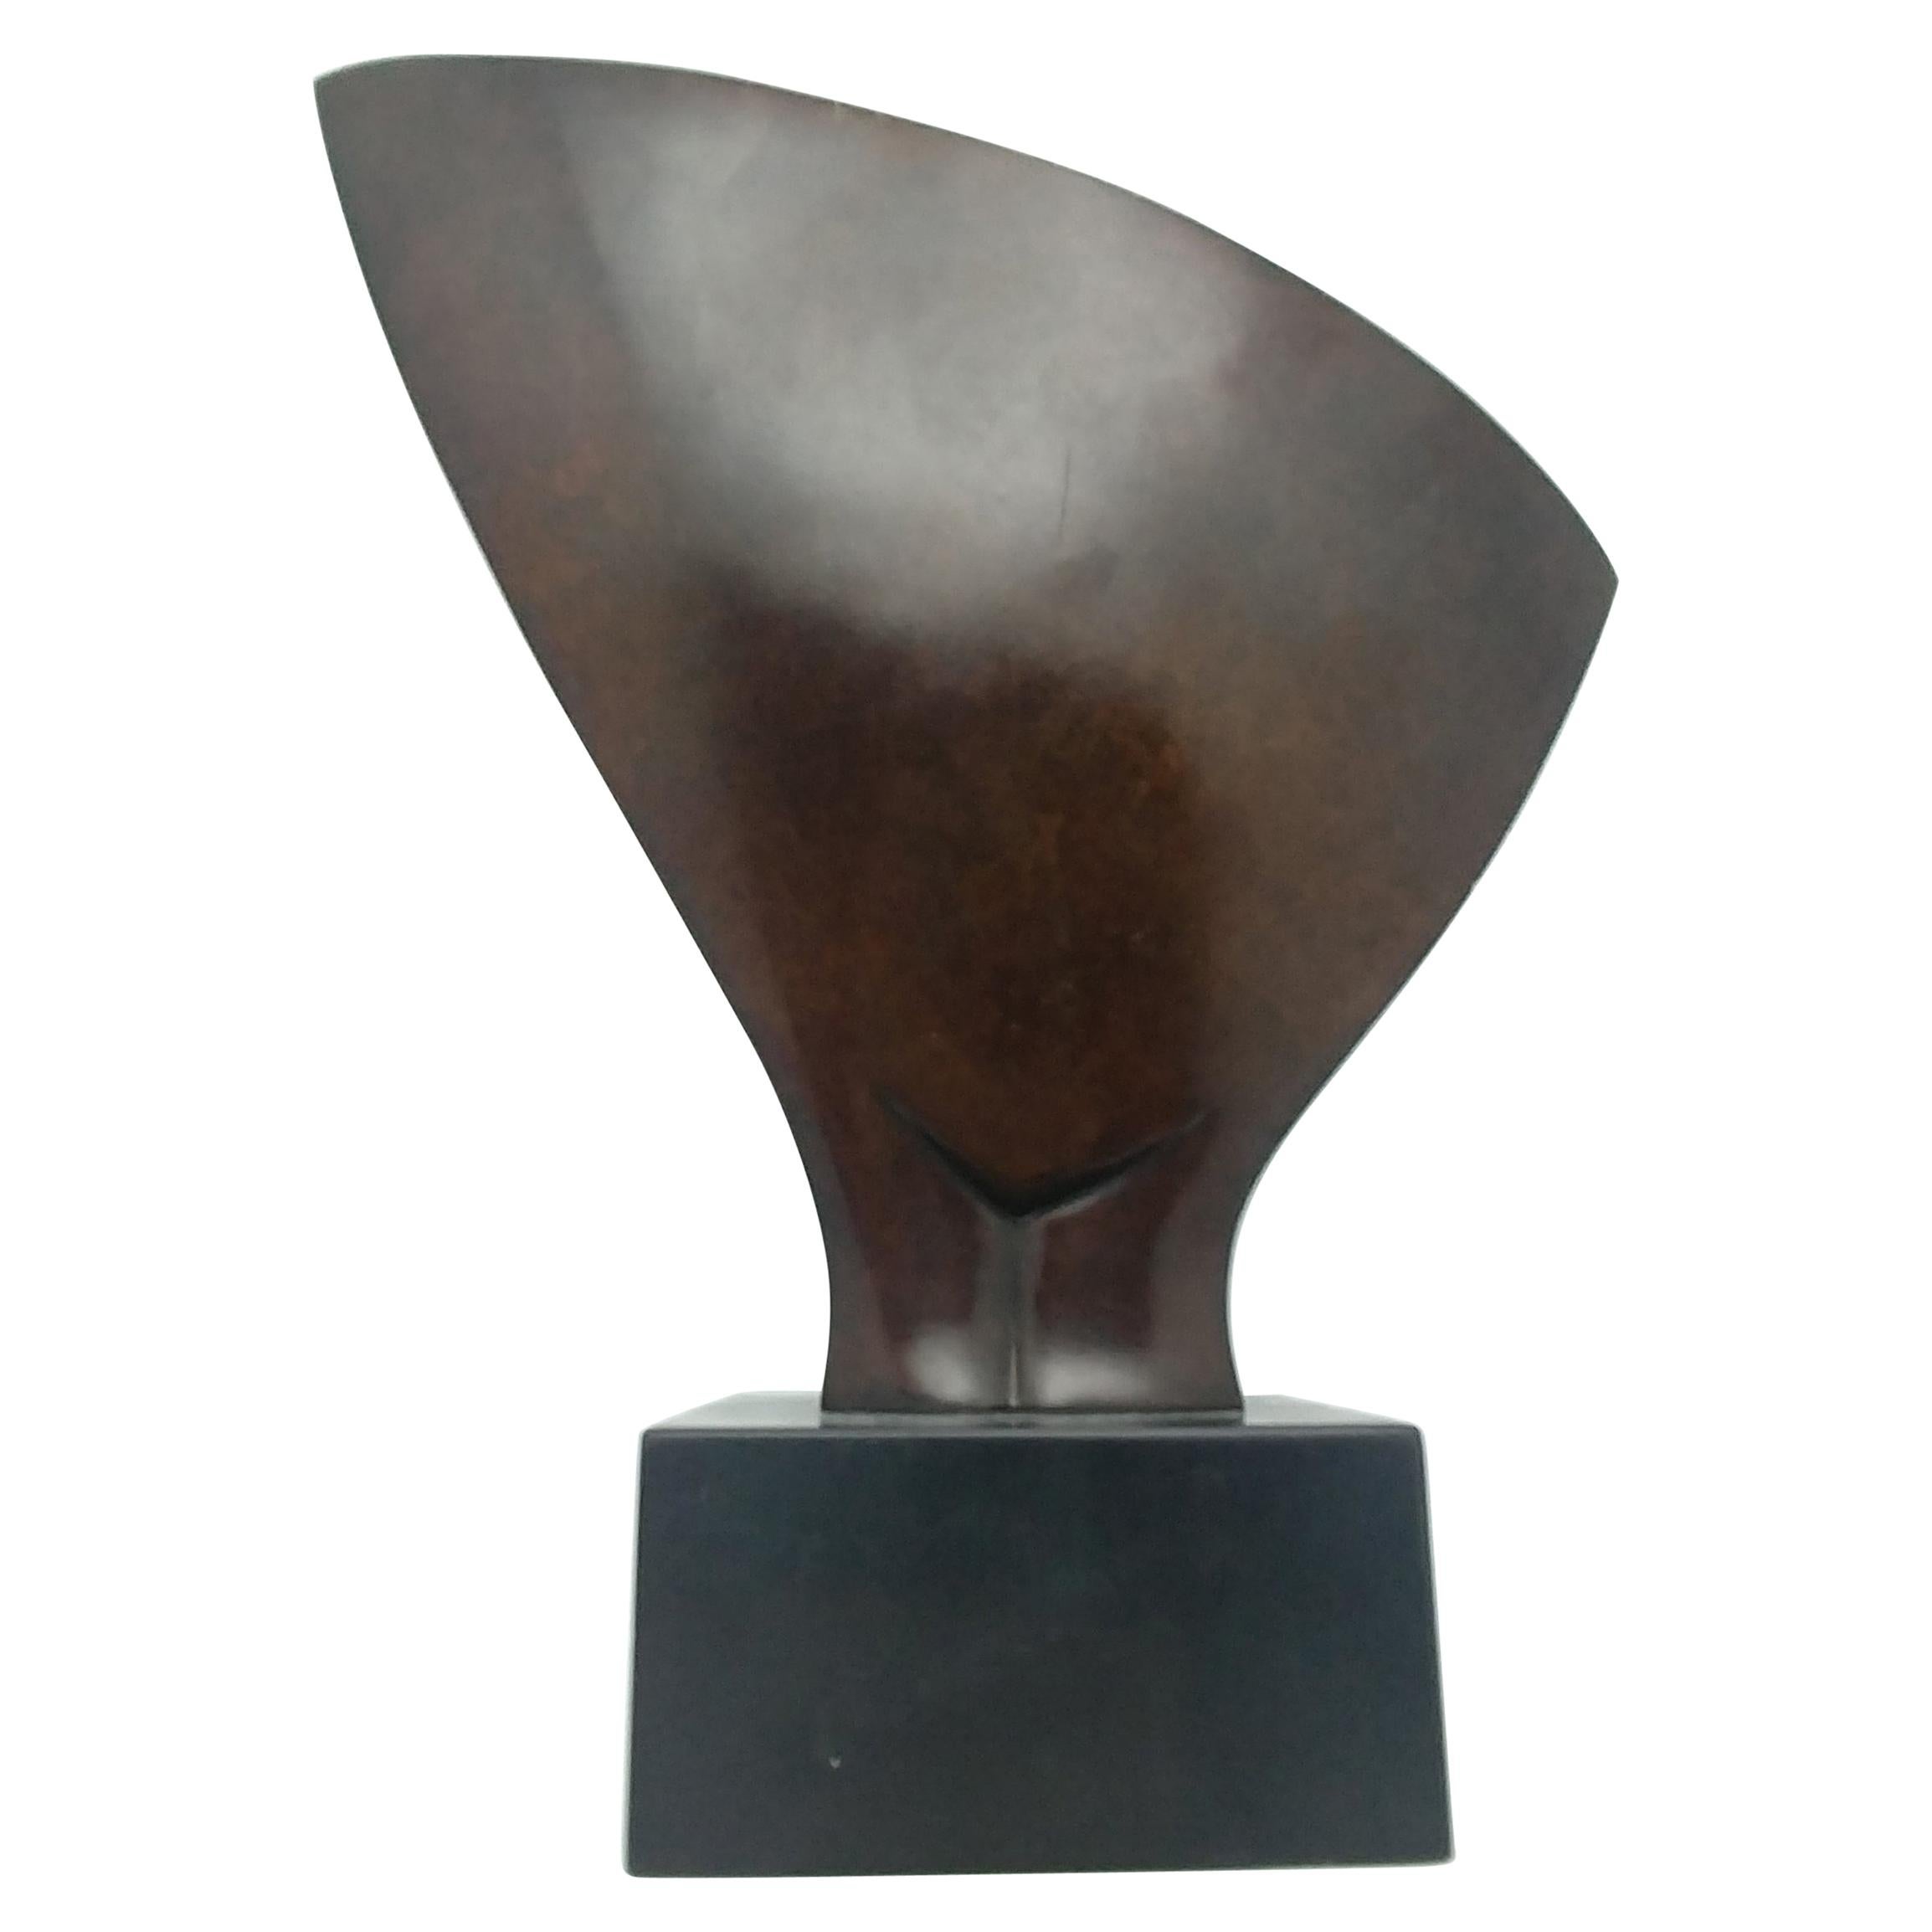 Jean Chauvin, Abstract Bronze, Patina, Signed Numbered 2/5, Title "Hirondelle"